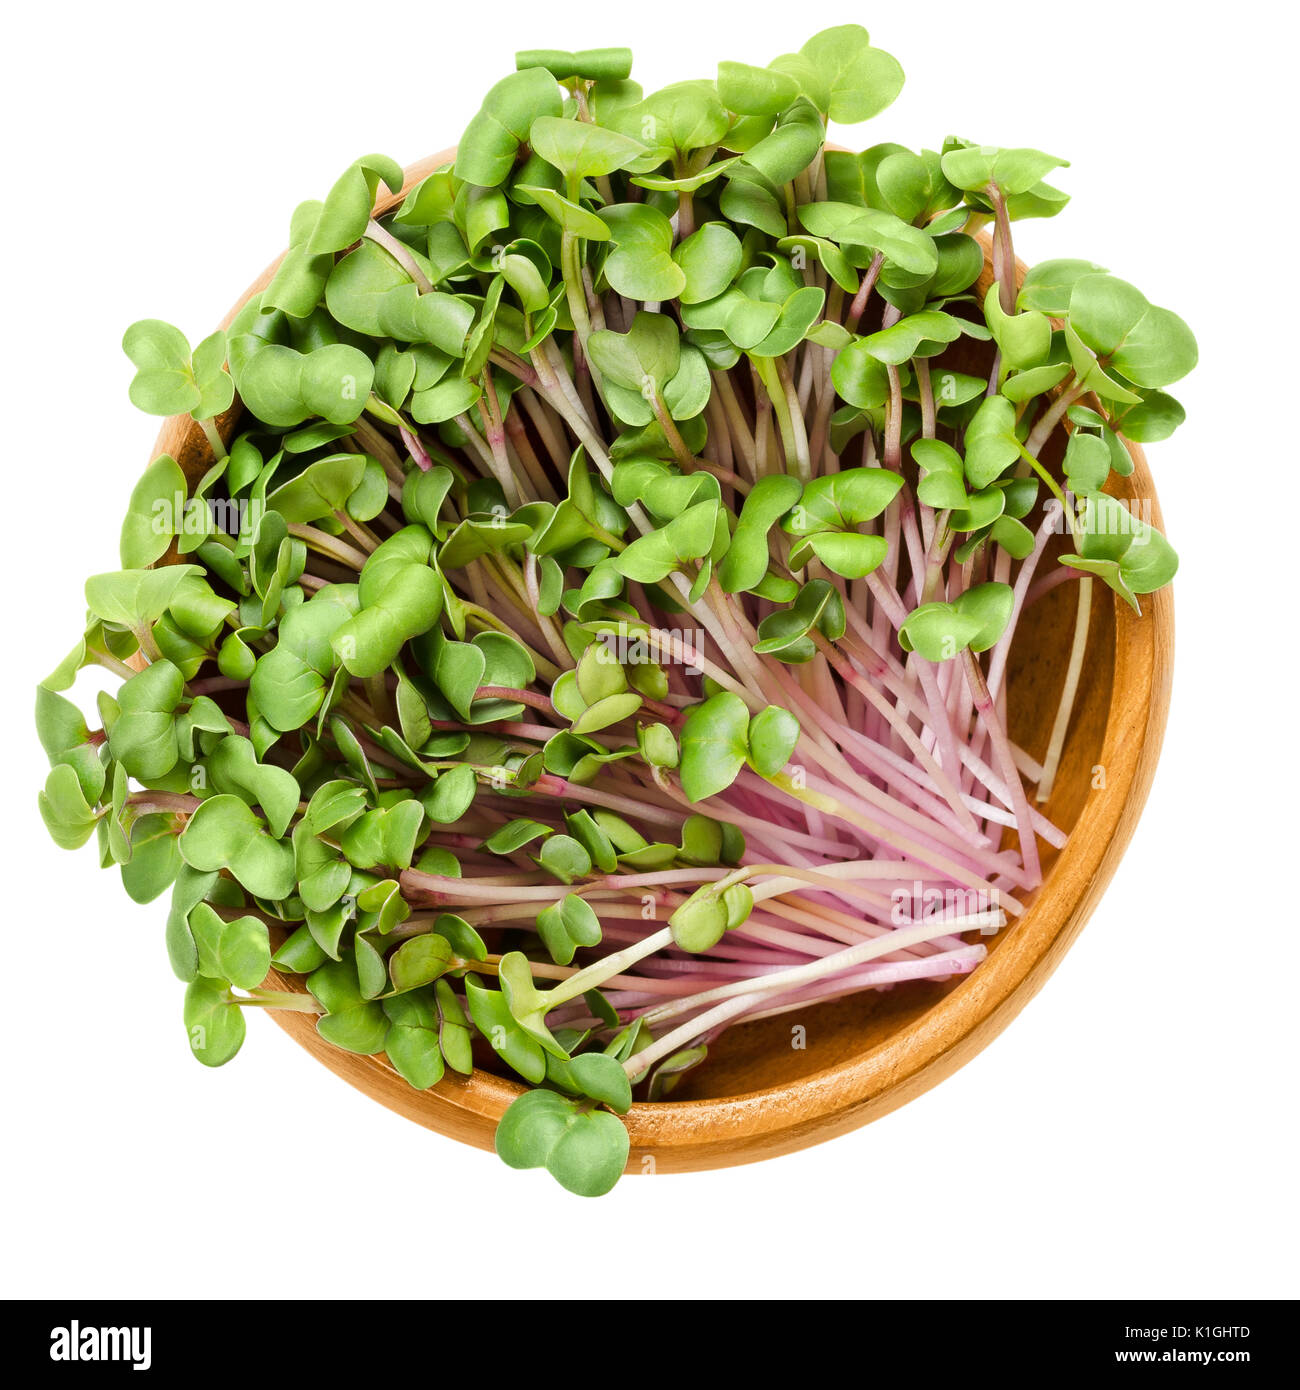 China Rose radish sprouts in wooden bowl. Cotyledons of Raphanus sativus. Chinese winter radish leaves with rose colored skin. Vegetable. Microgreen. Stock Photo